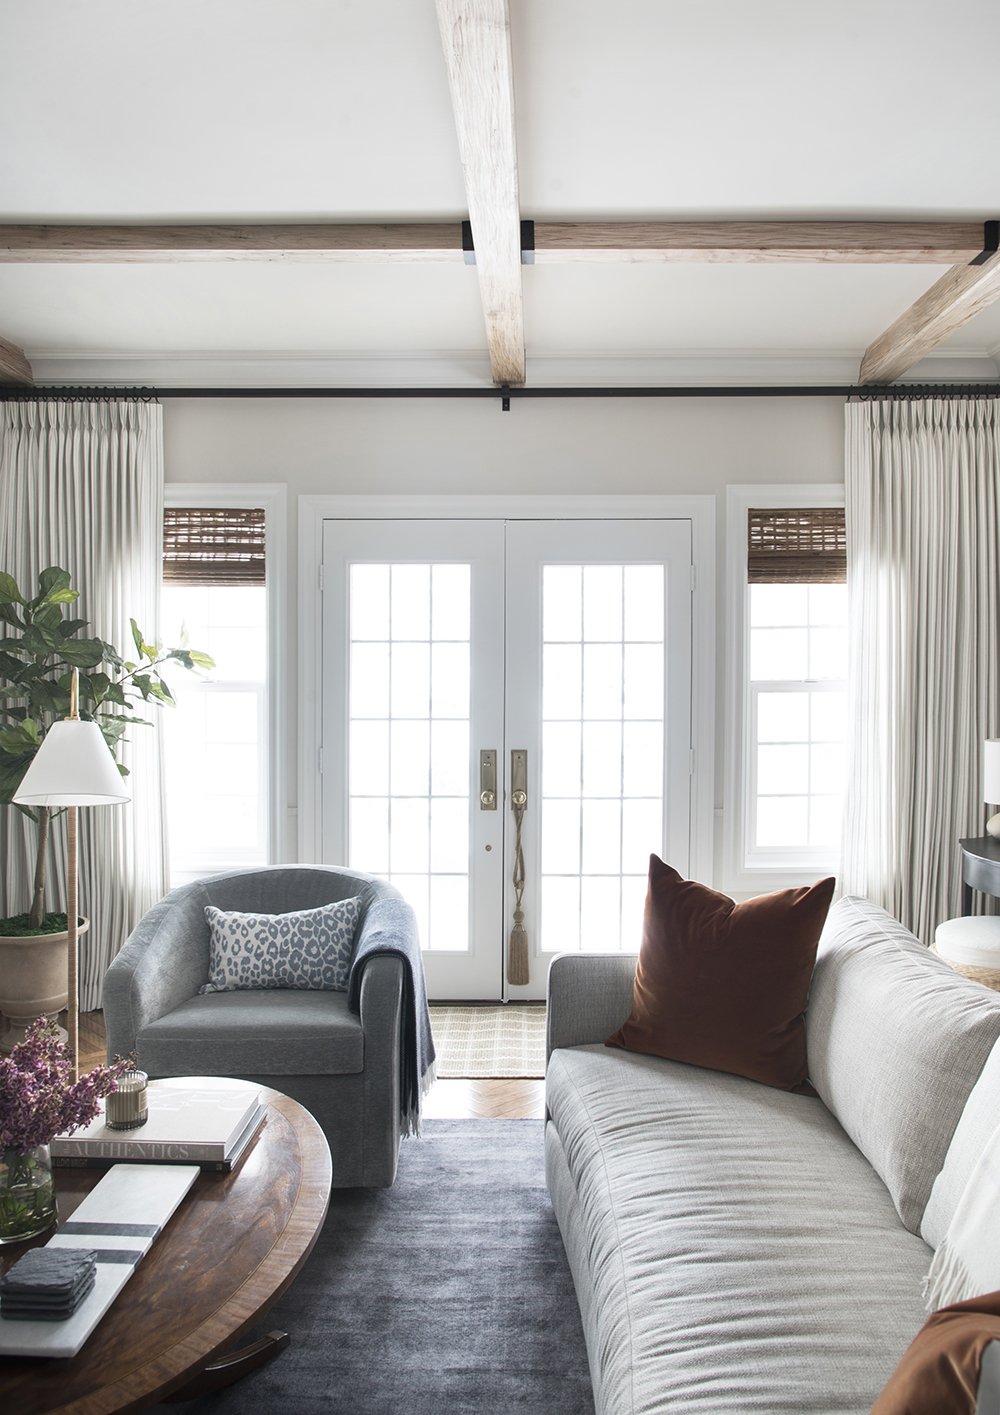 When to use curtains vs shades and 7 unique window scenarios. | Nadine Stay - What window covering to use on bay windows, narrow windows, high windows, basement windows, or a row of windows. Roman shades or drapery. Image via Room For Tuesday